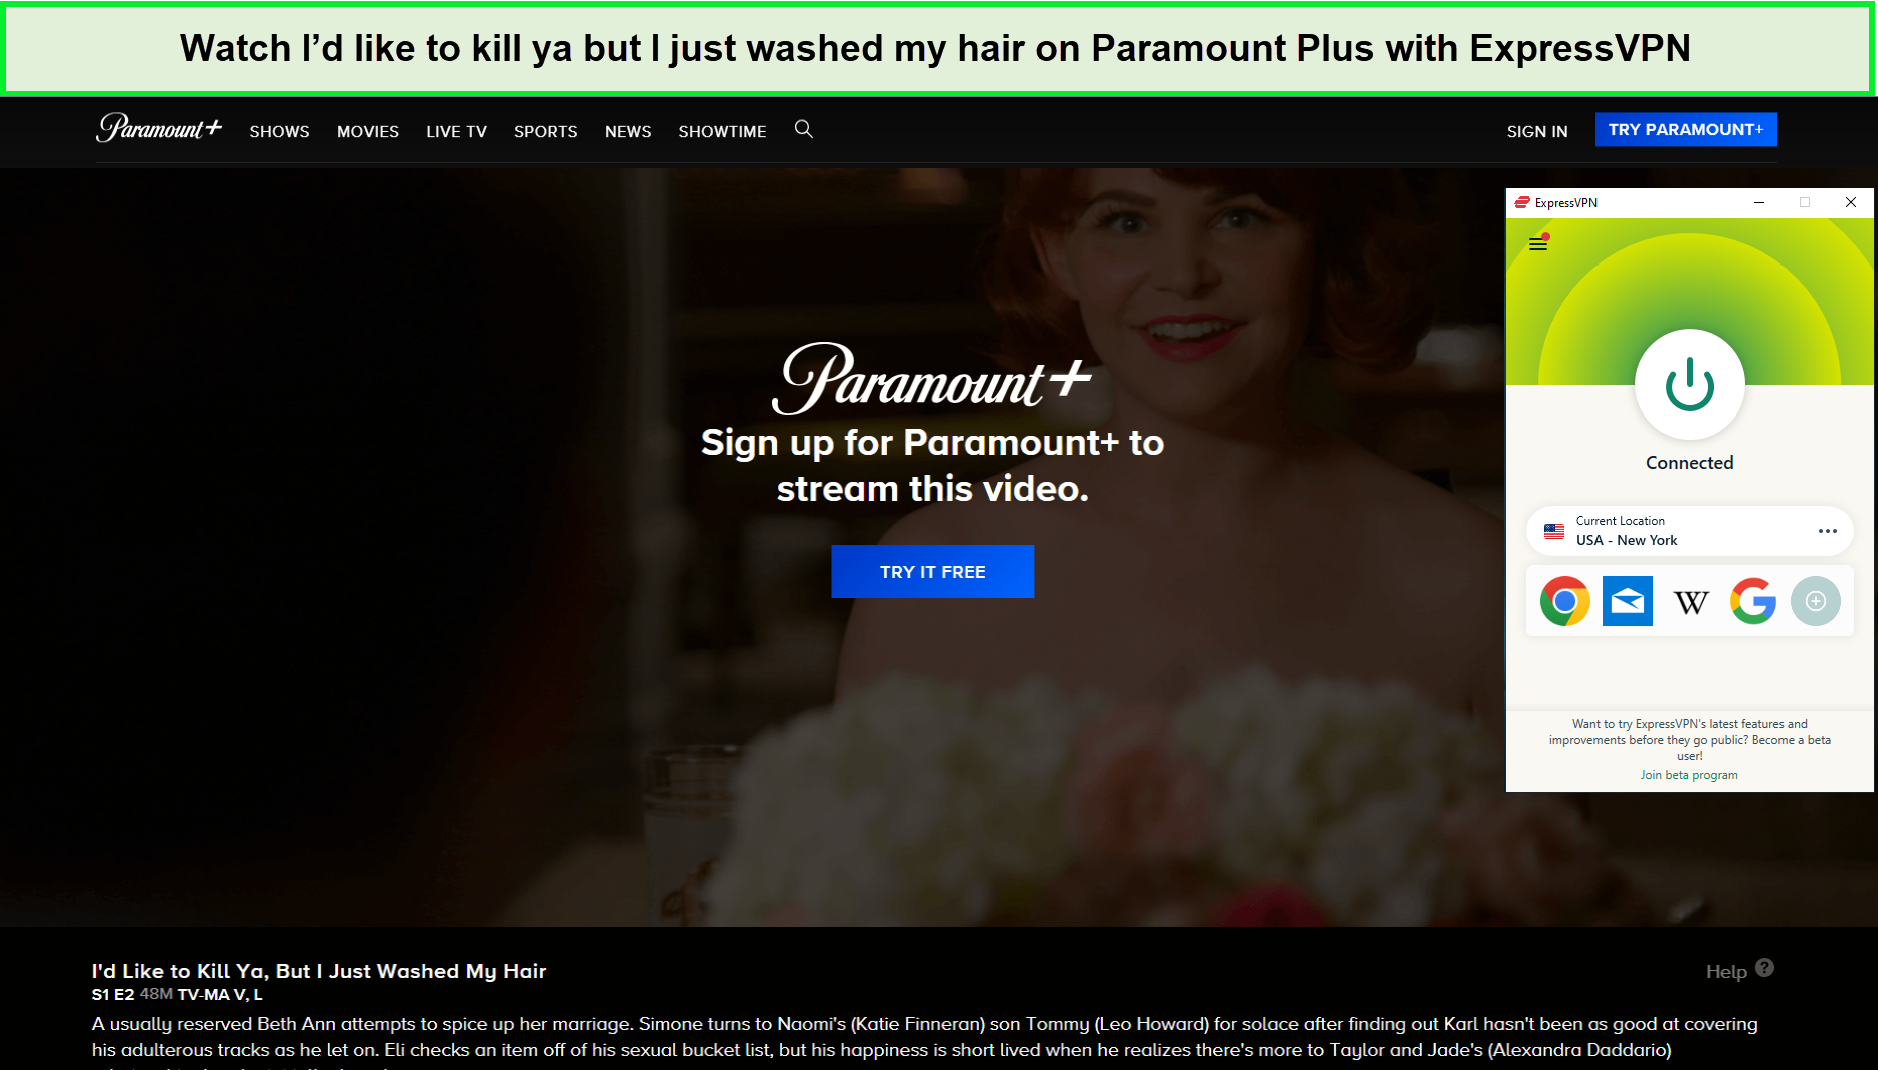 Watch-Id-like-to-kill-ya-but-I-just-washed-my-hair-in-Franceon-Paramount-Plus-with-ExpressVPN